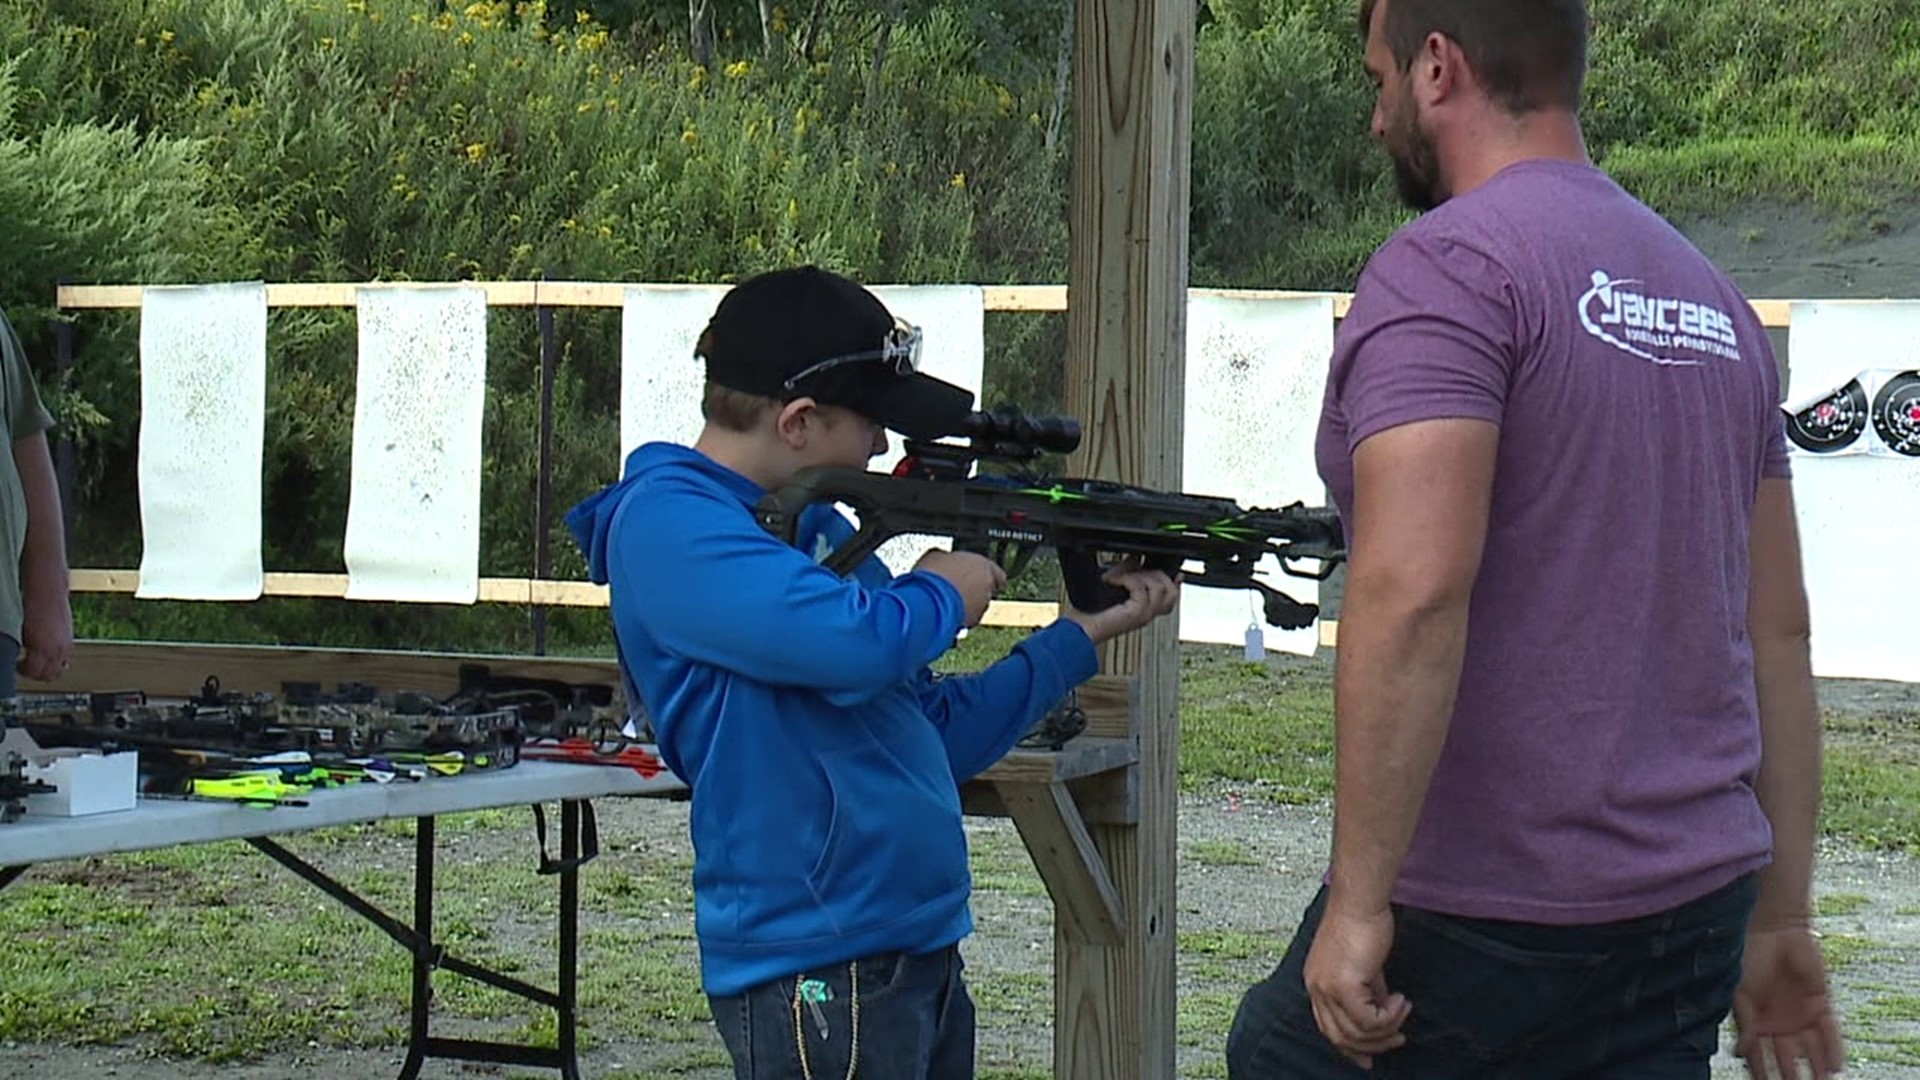 The competition was held at Game Lands 300 Rifle Range in Archbald.